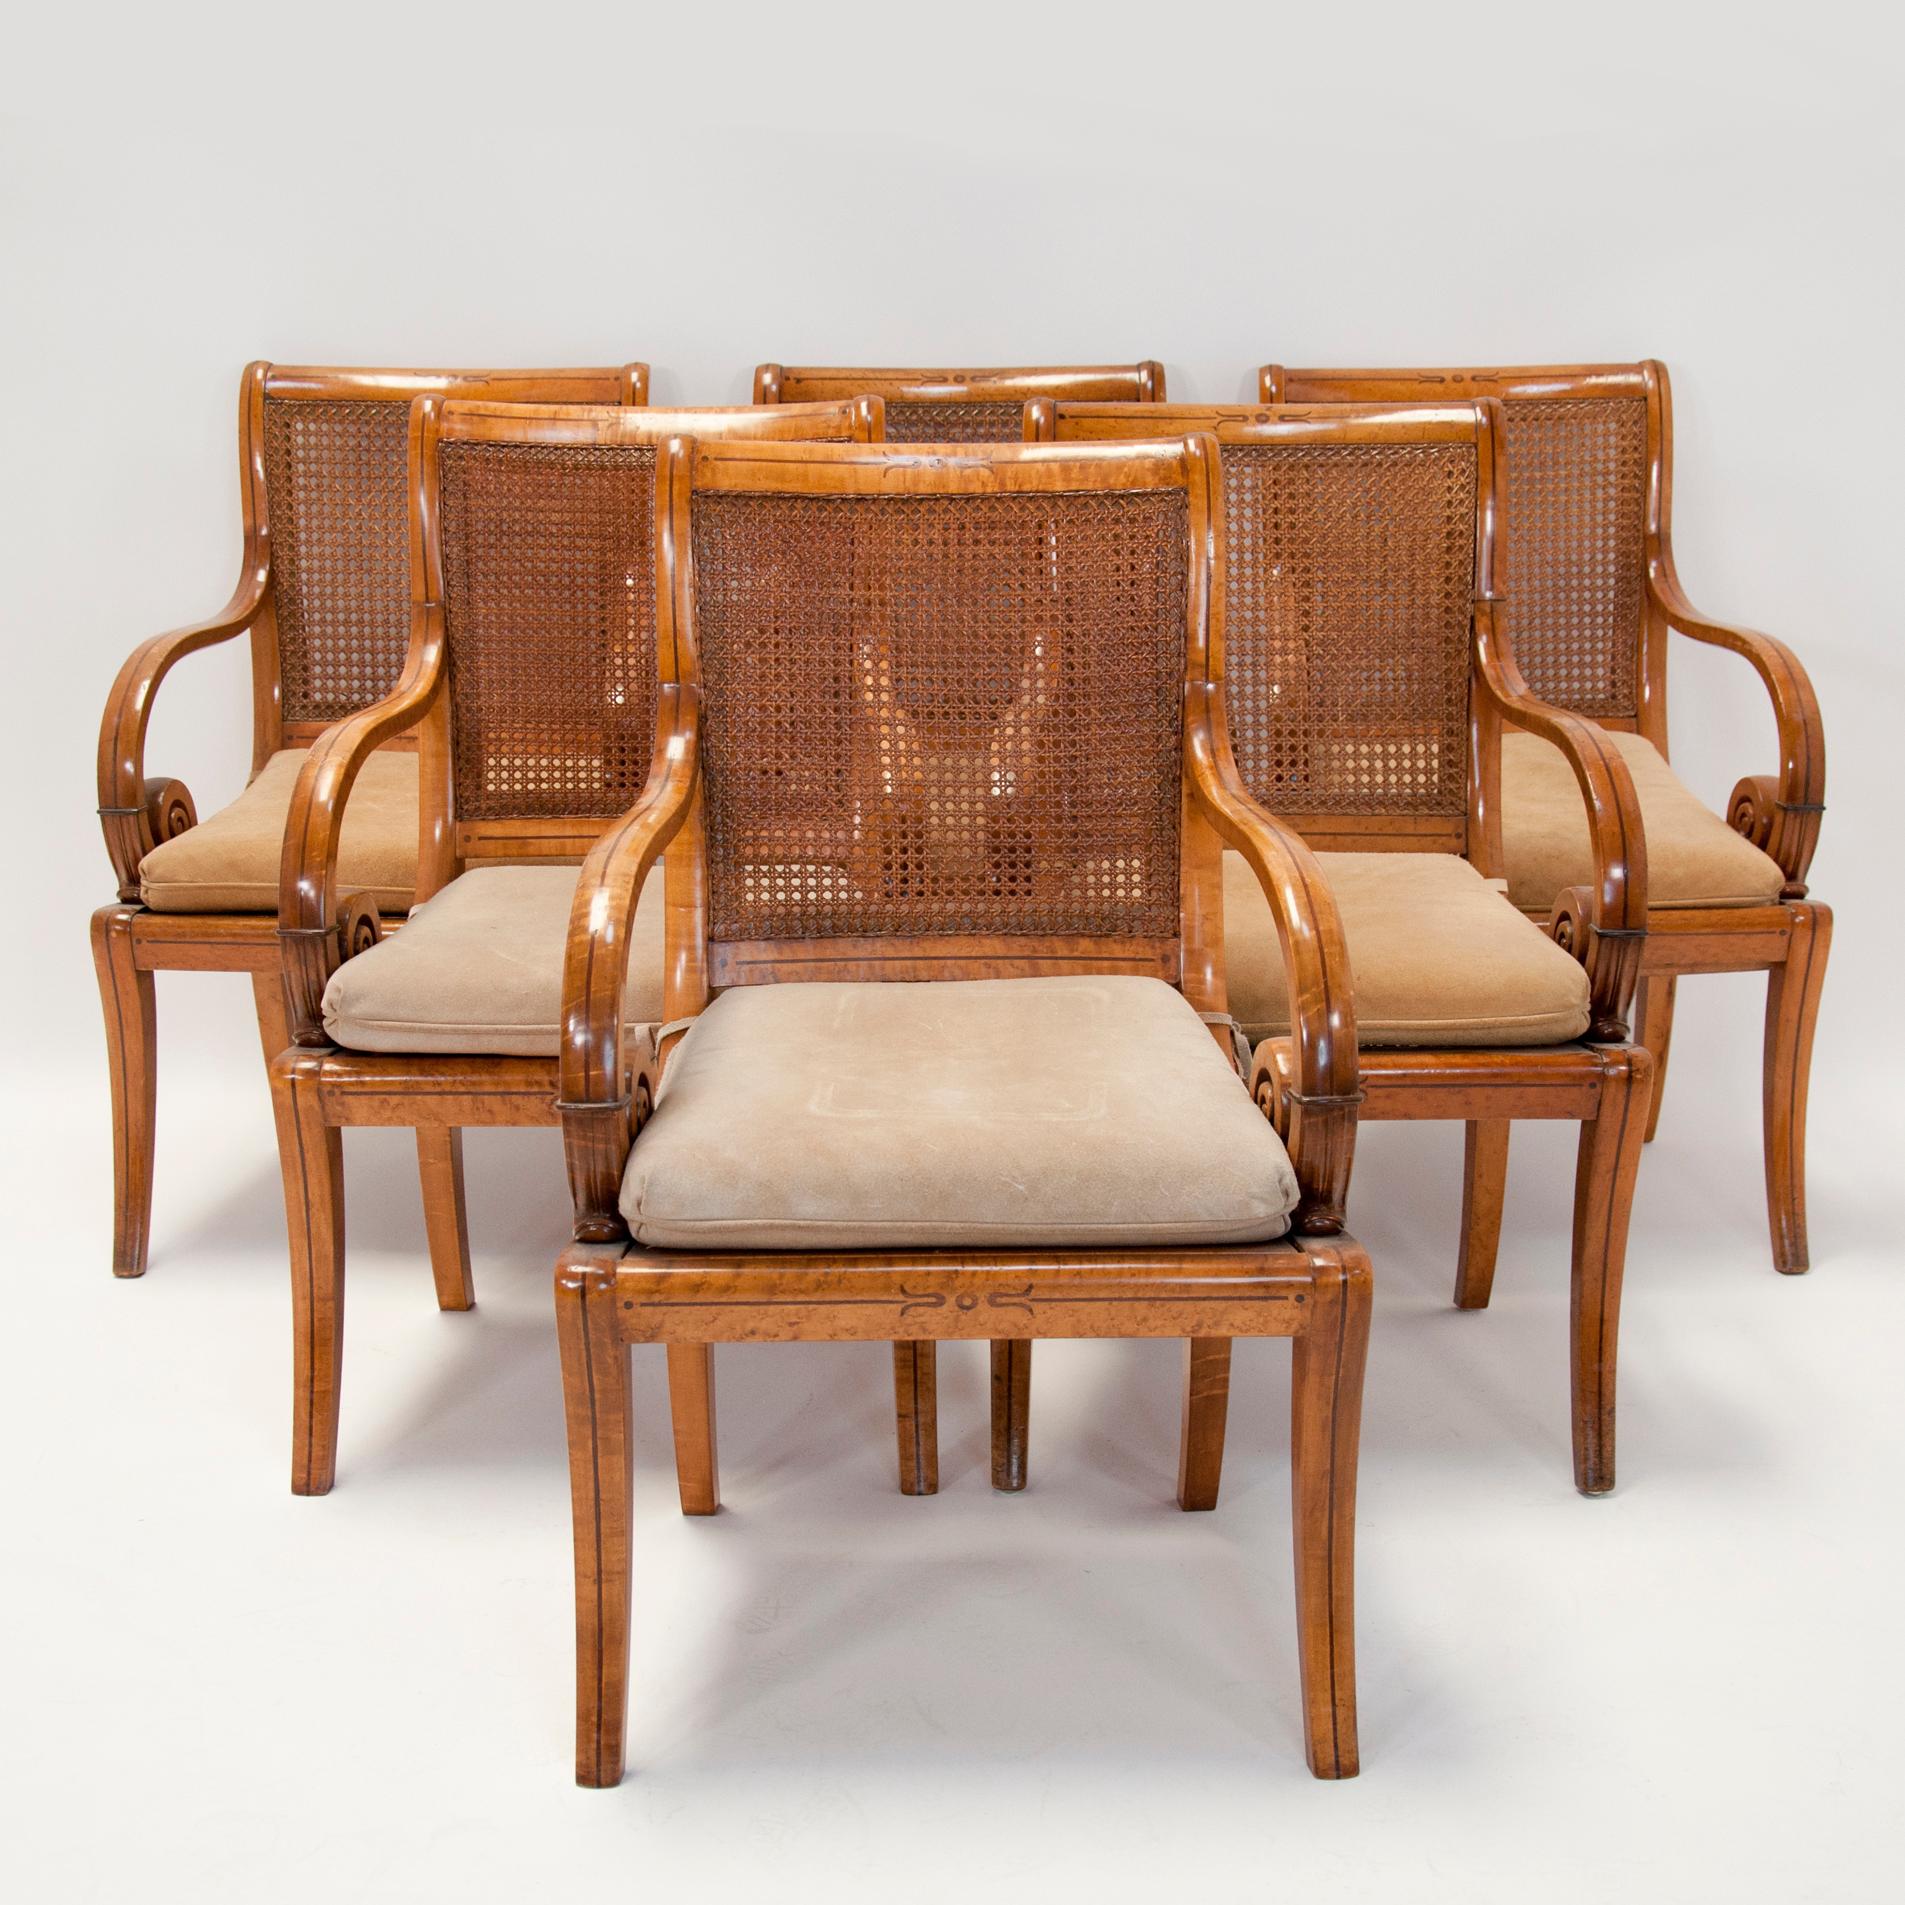 Set of six Charles X bird's-eye maple caned armchairs. Chairs consist of scrolled arms and removable suede cushions. Inlaid ebony stripe traces along seat back, arms, seat bottom, and legs.